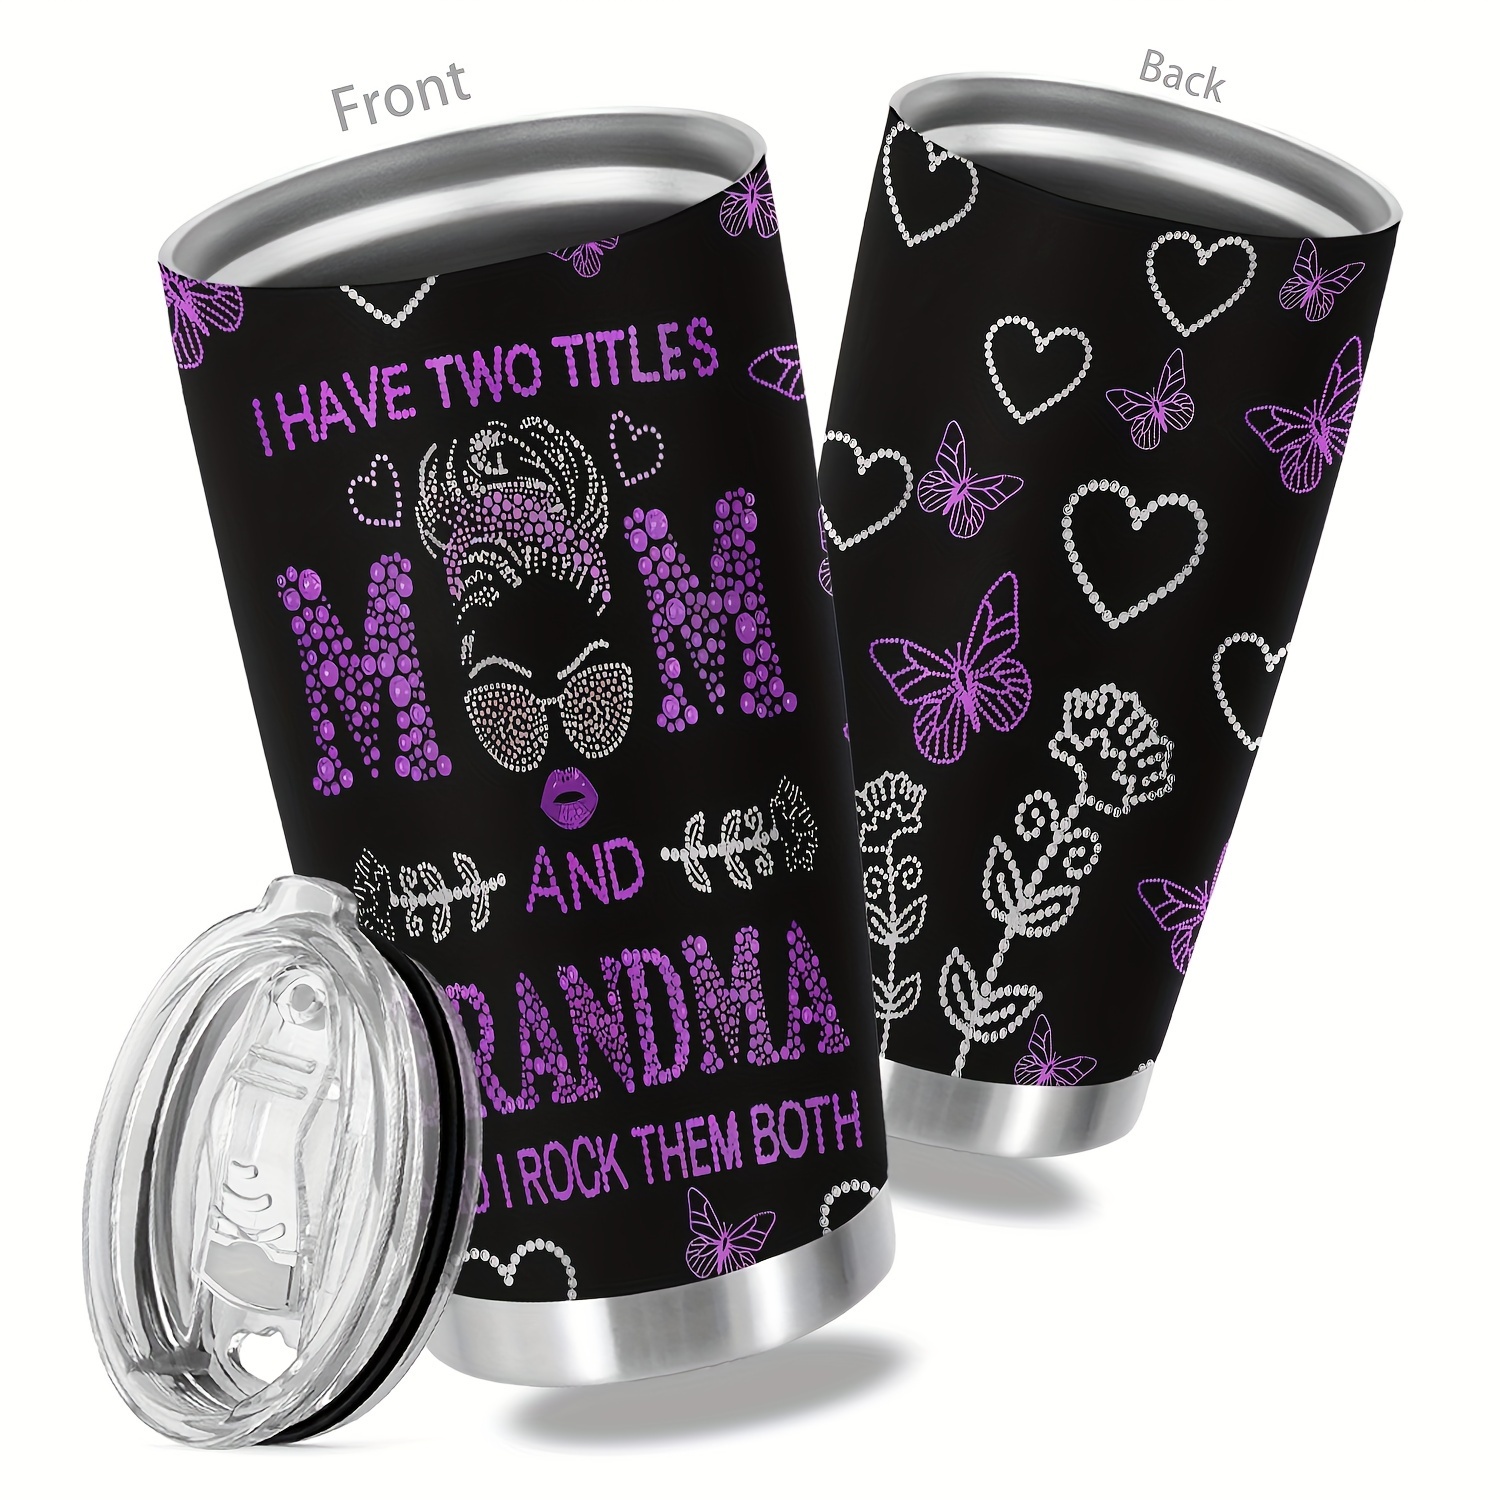 Best Grandma Gifts - 20 oz Tumbler Christmas Gift for Grandma Grandmother  from Granddaughter, Grandson, Grandkids, Insulated Cup Funny Birthday  Presents Boxed Gift for Nana/New Grandma/Grandparents 